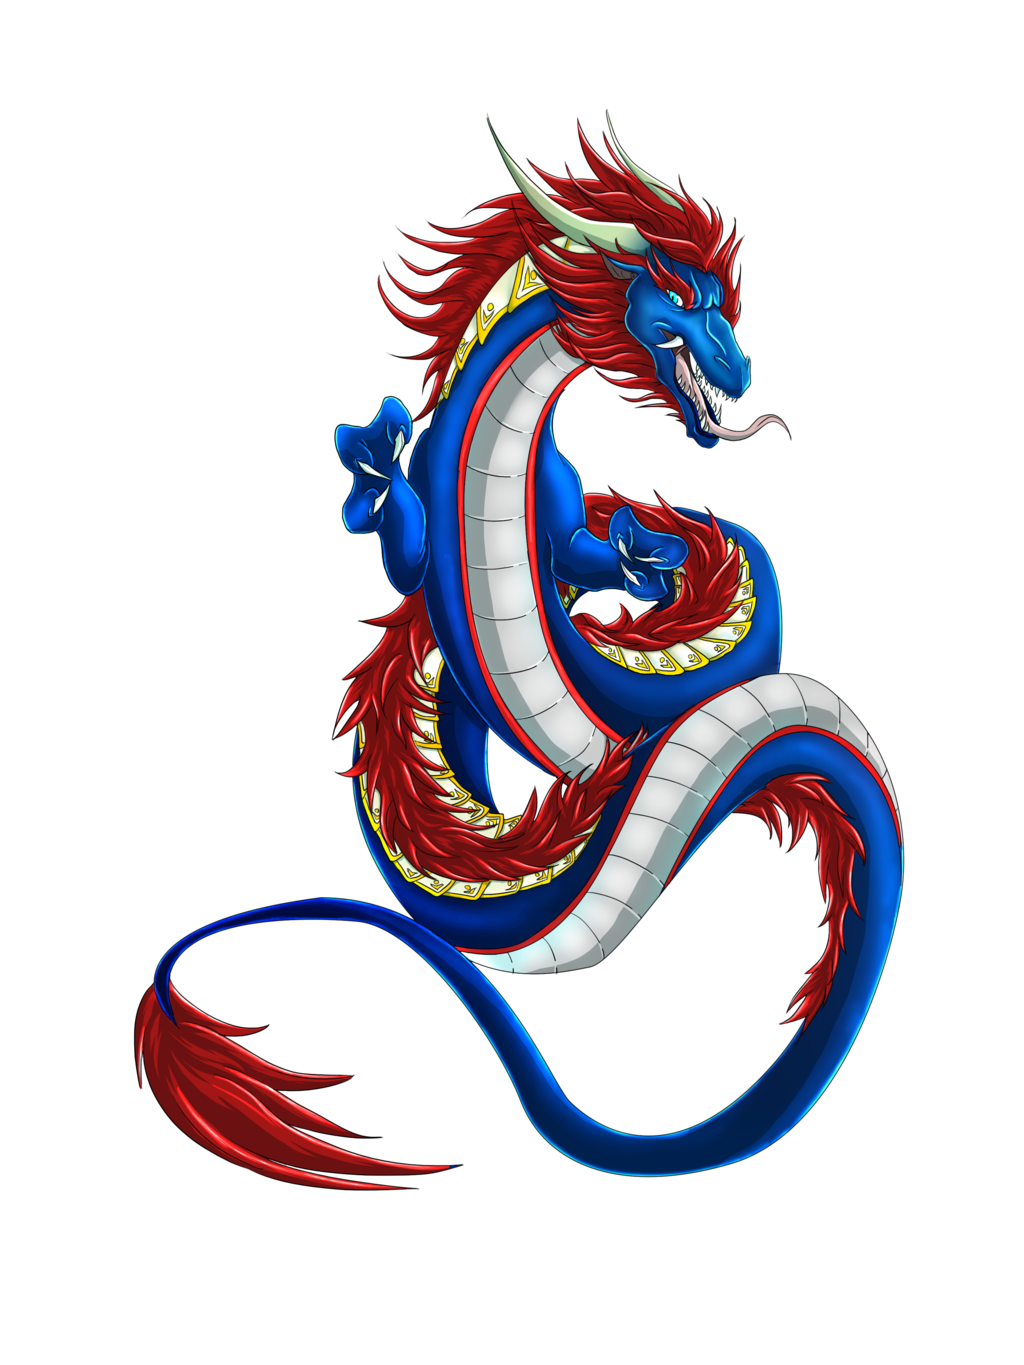 Chinese Dragon Gif - ClipArt Best